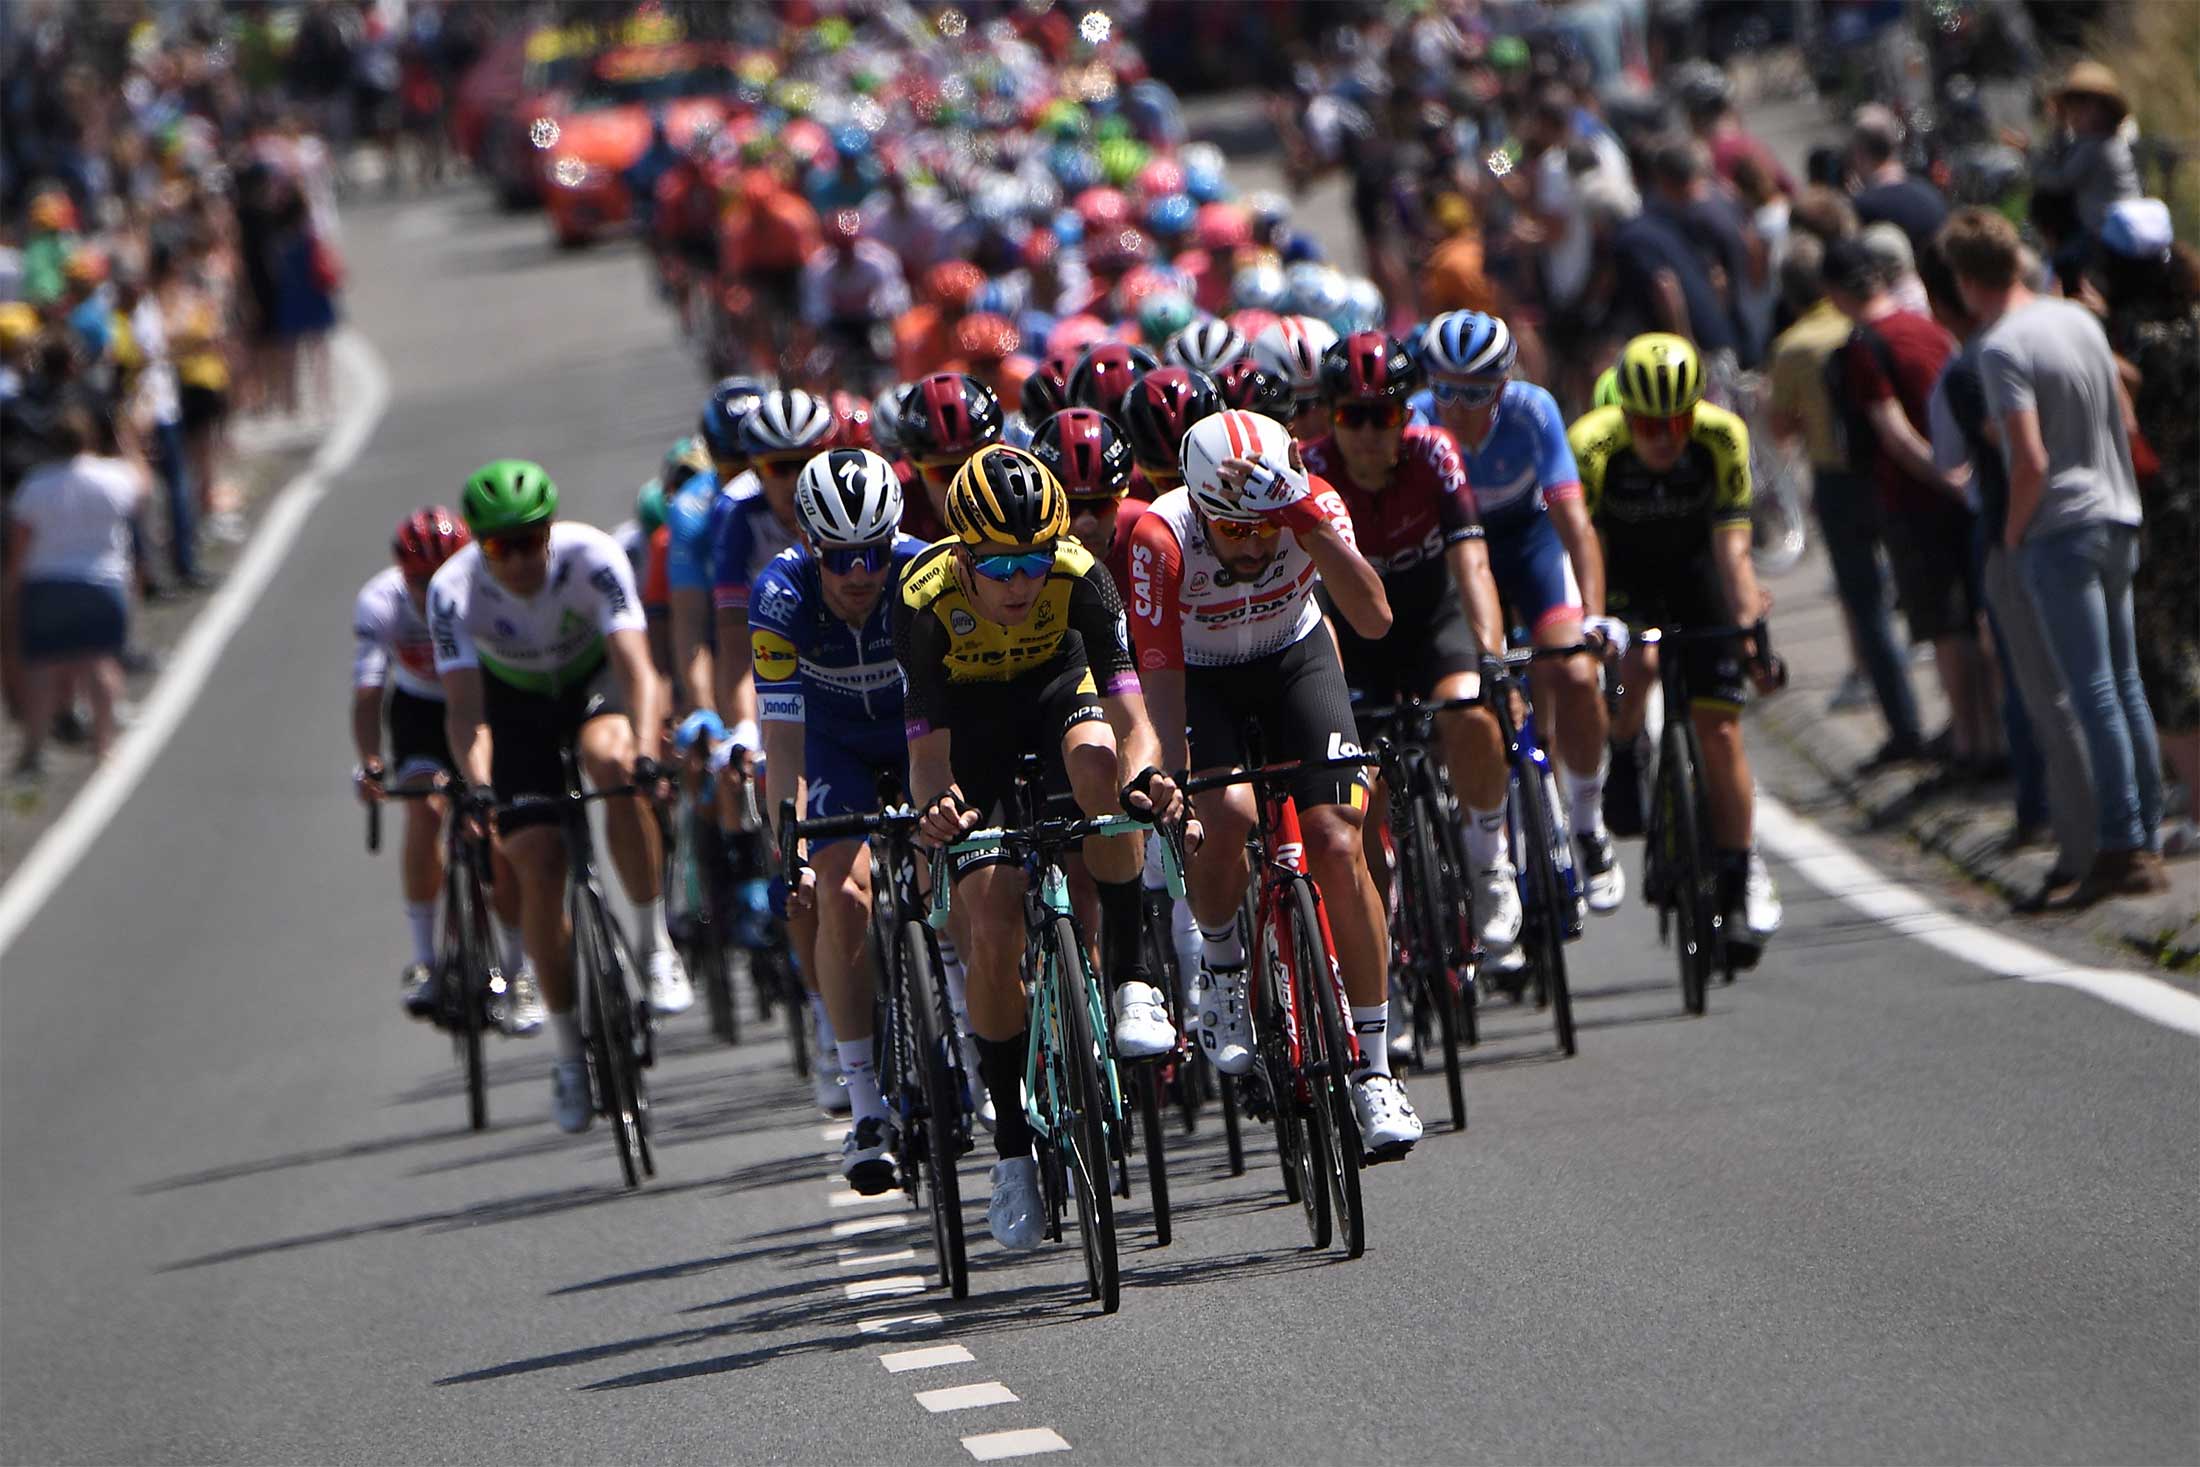 The Tour de France Over, Pro Cycling Is Moving to Save the Sport